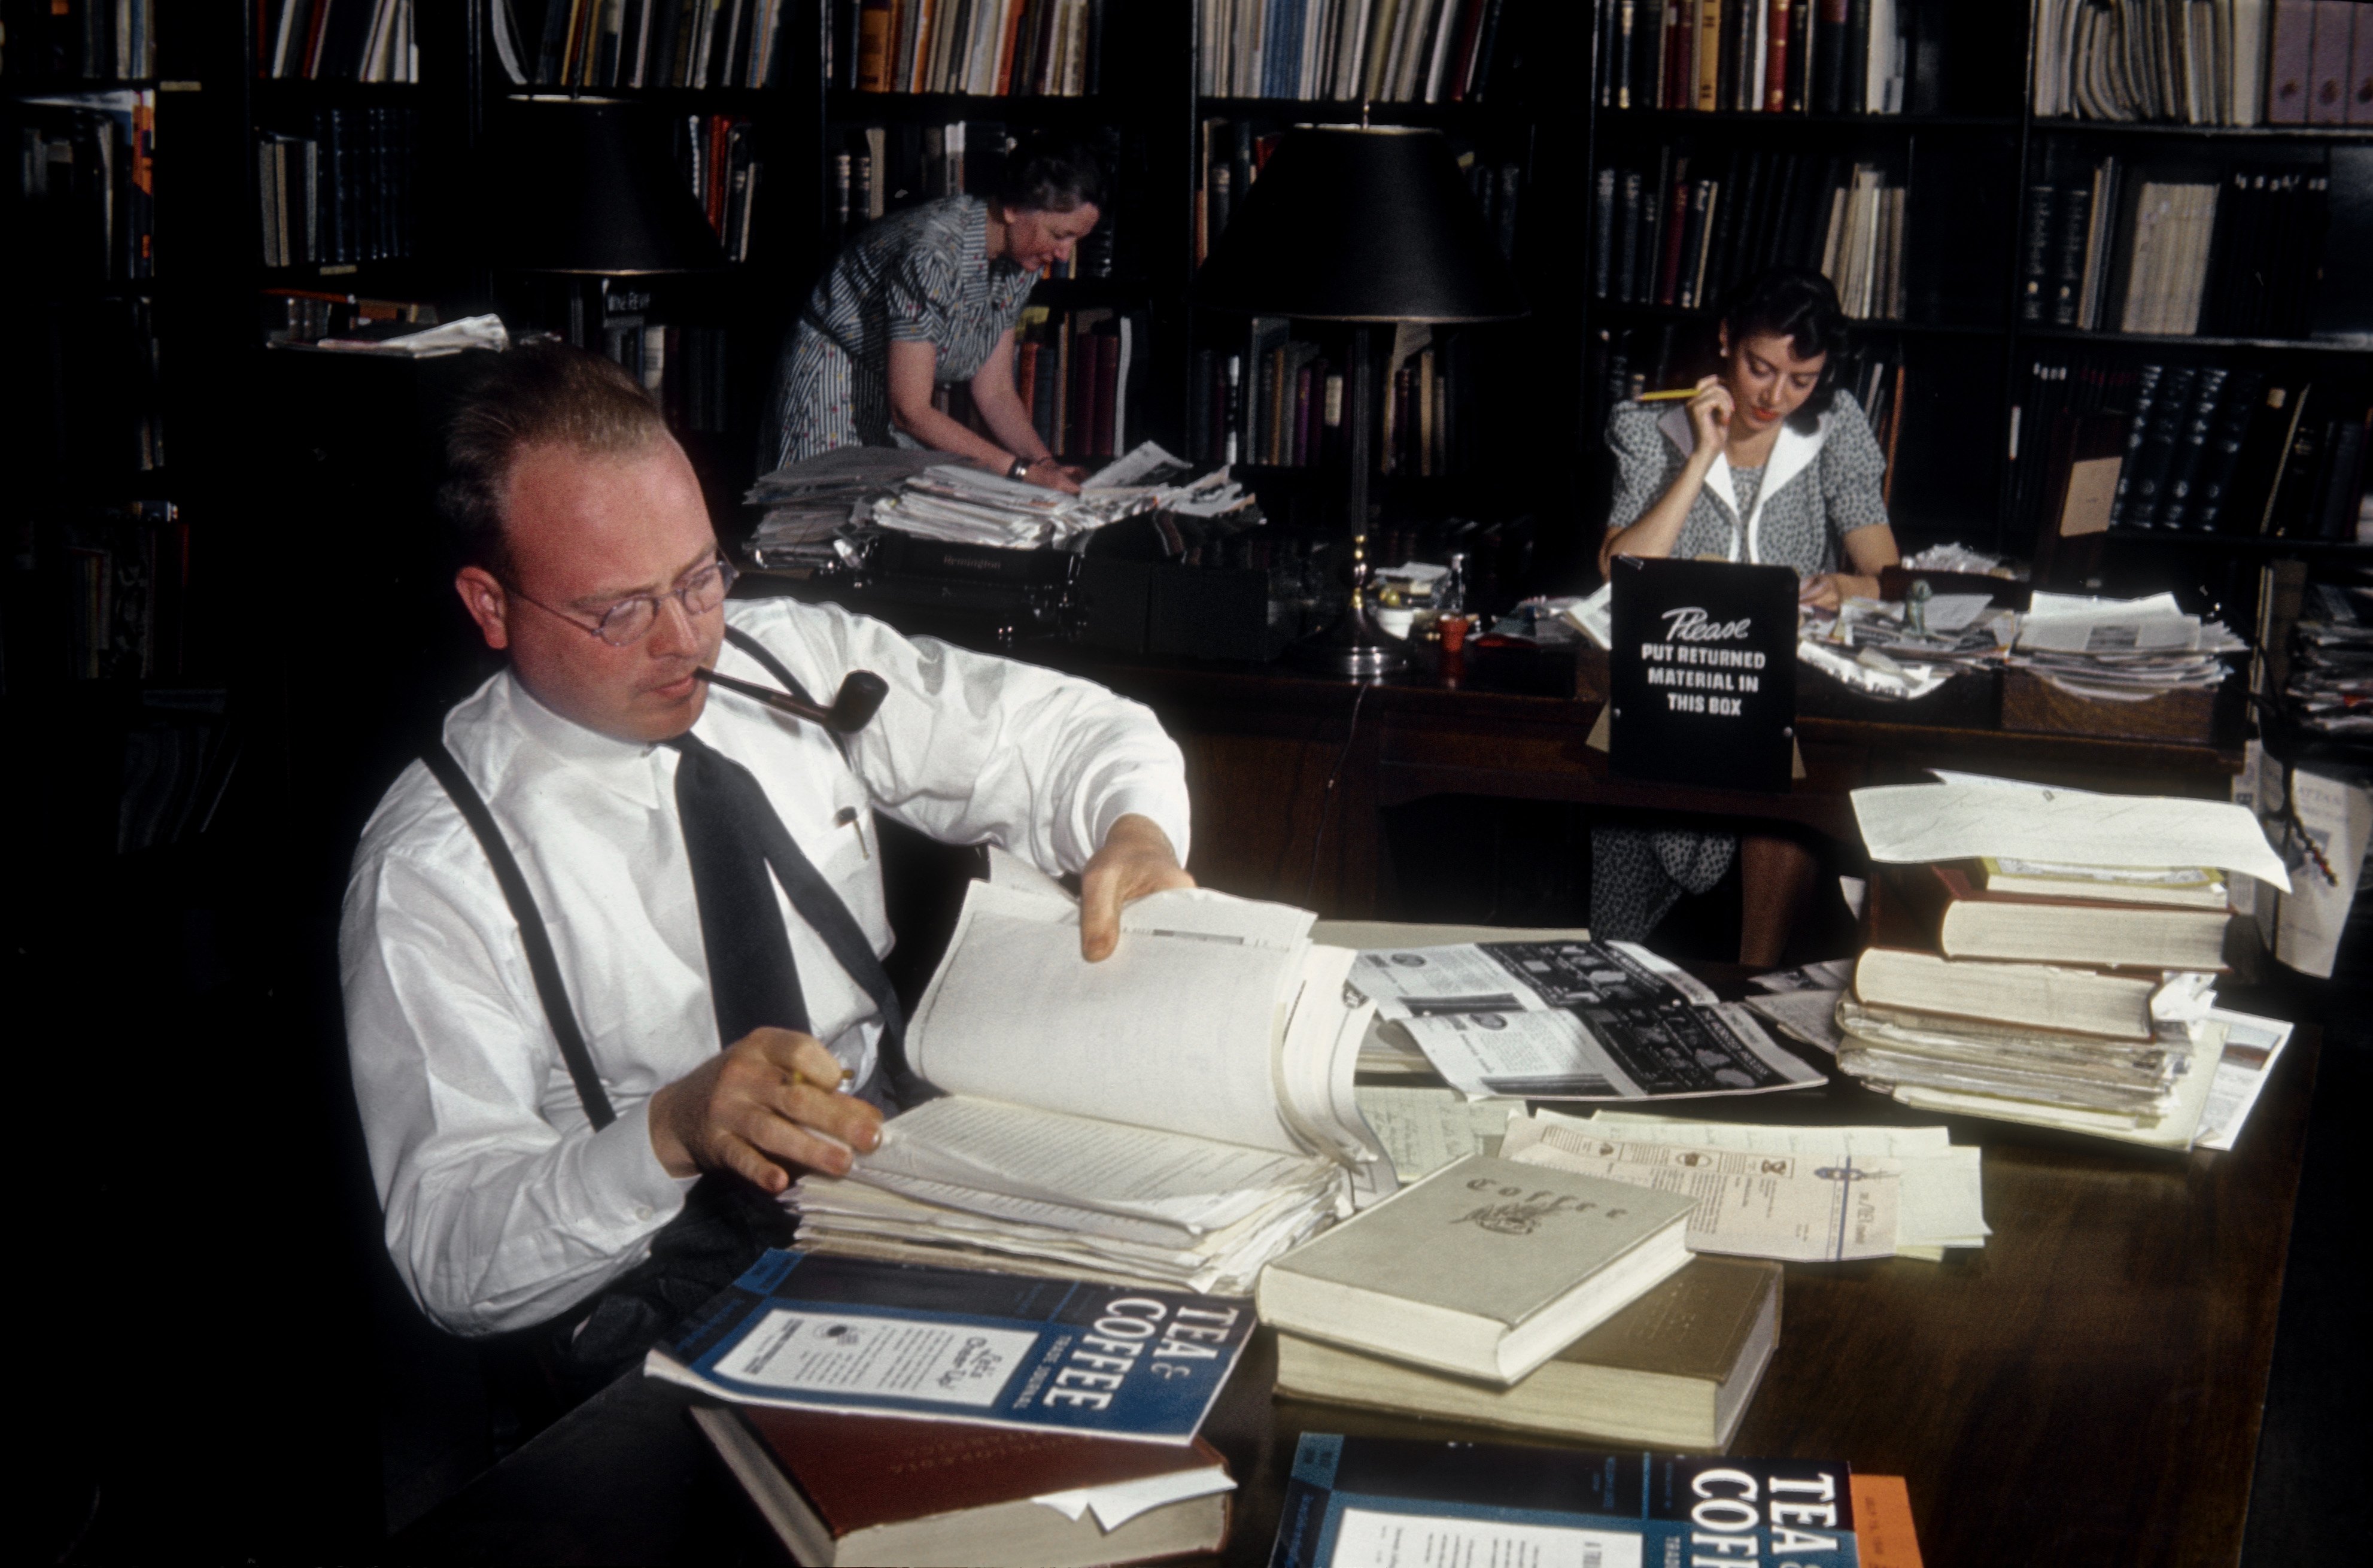 A Madison Avenue advertising executive works on a project circa 1950